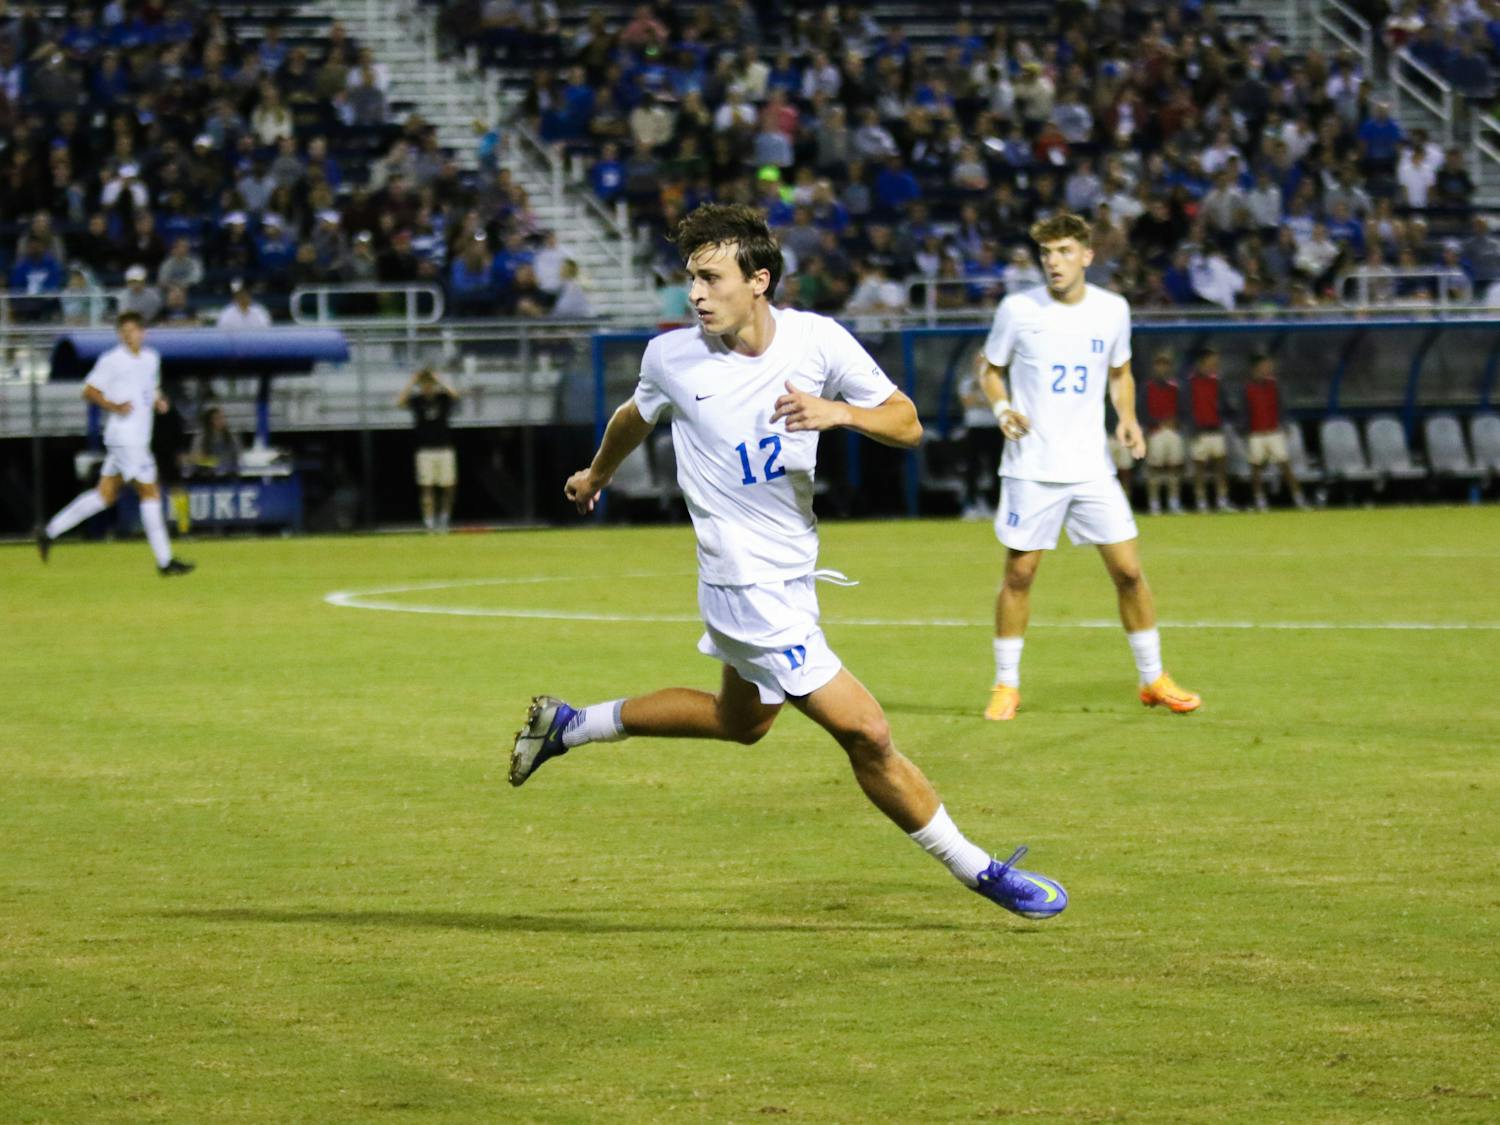 Duke came out on top Saturday thanks to Ruben Mesalles' second-half score.